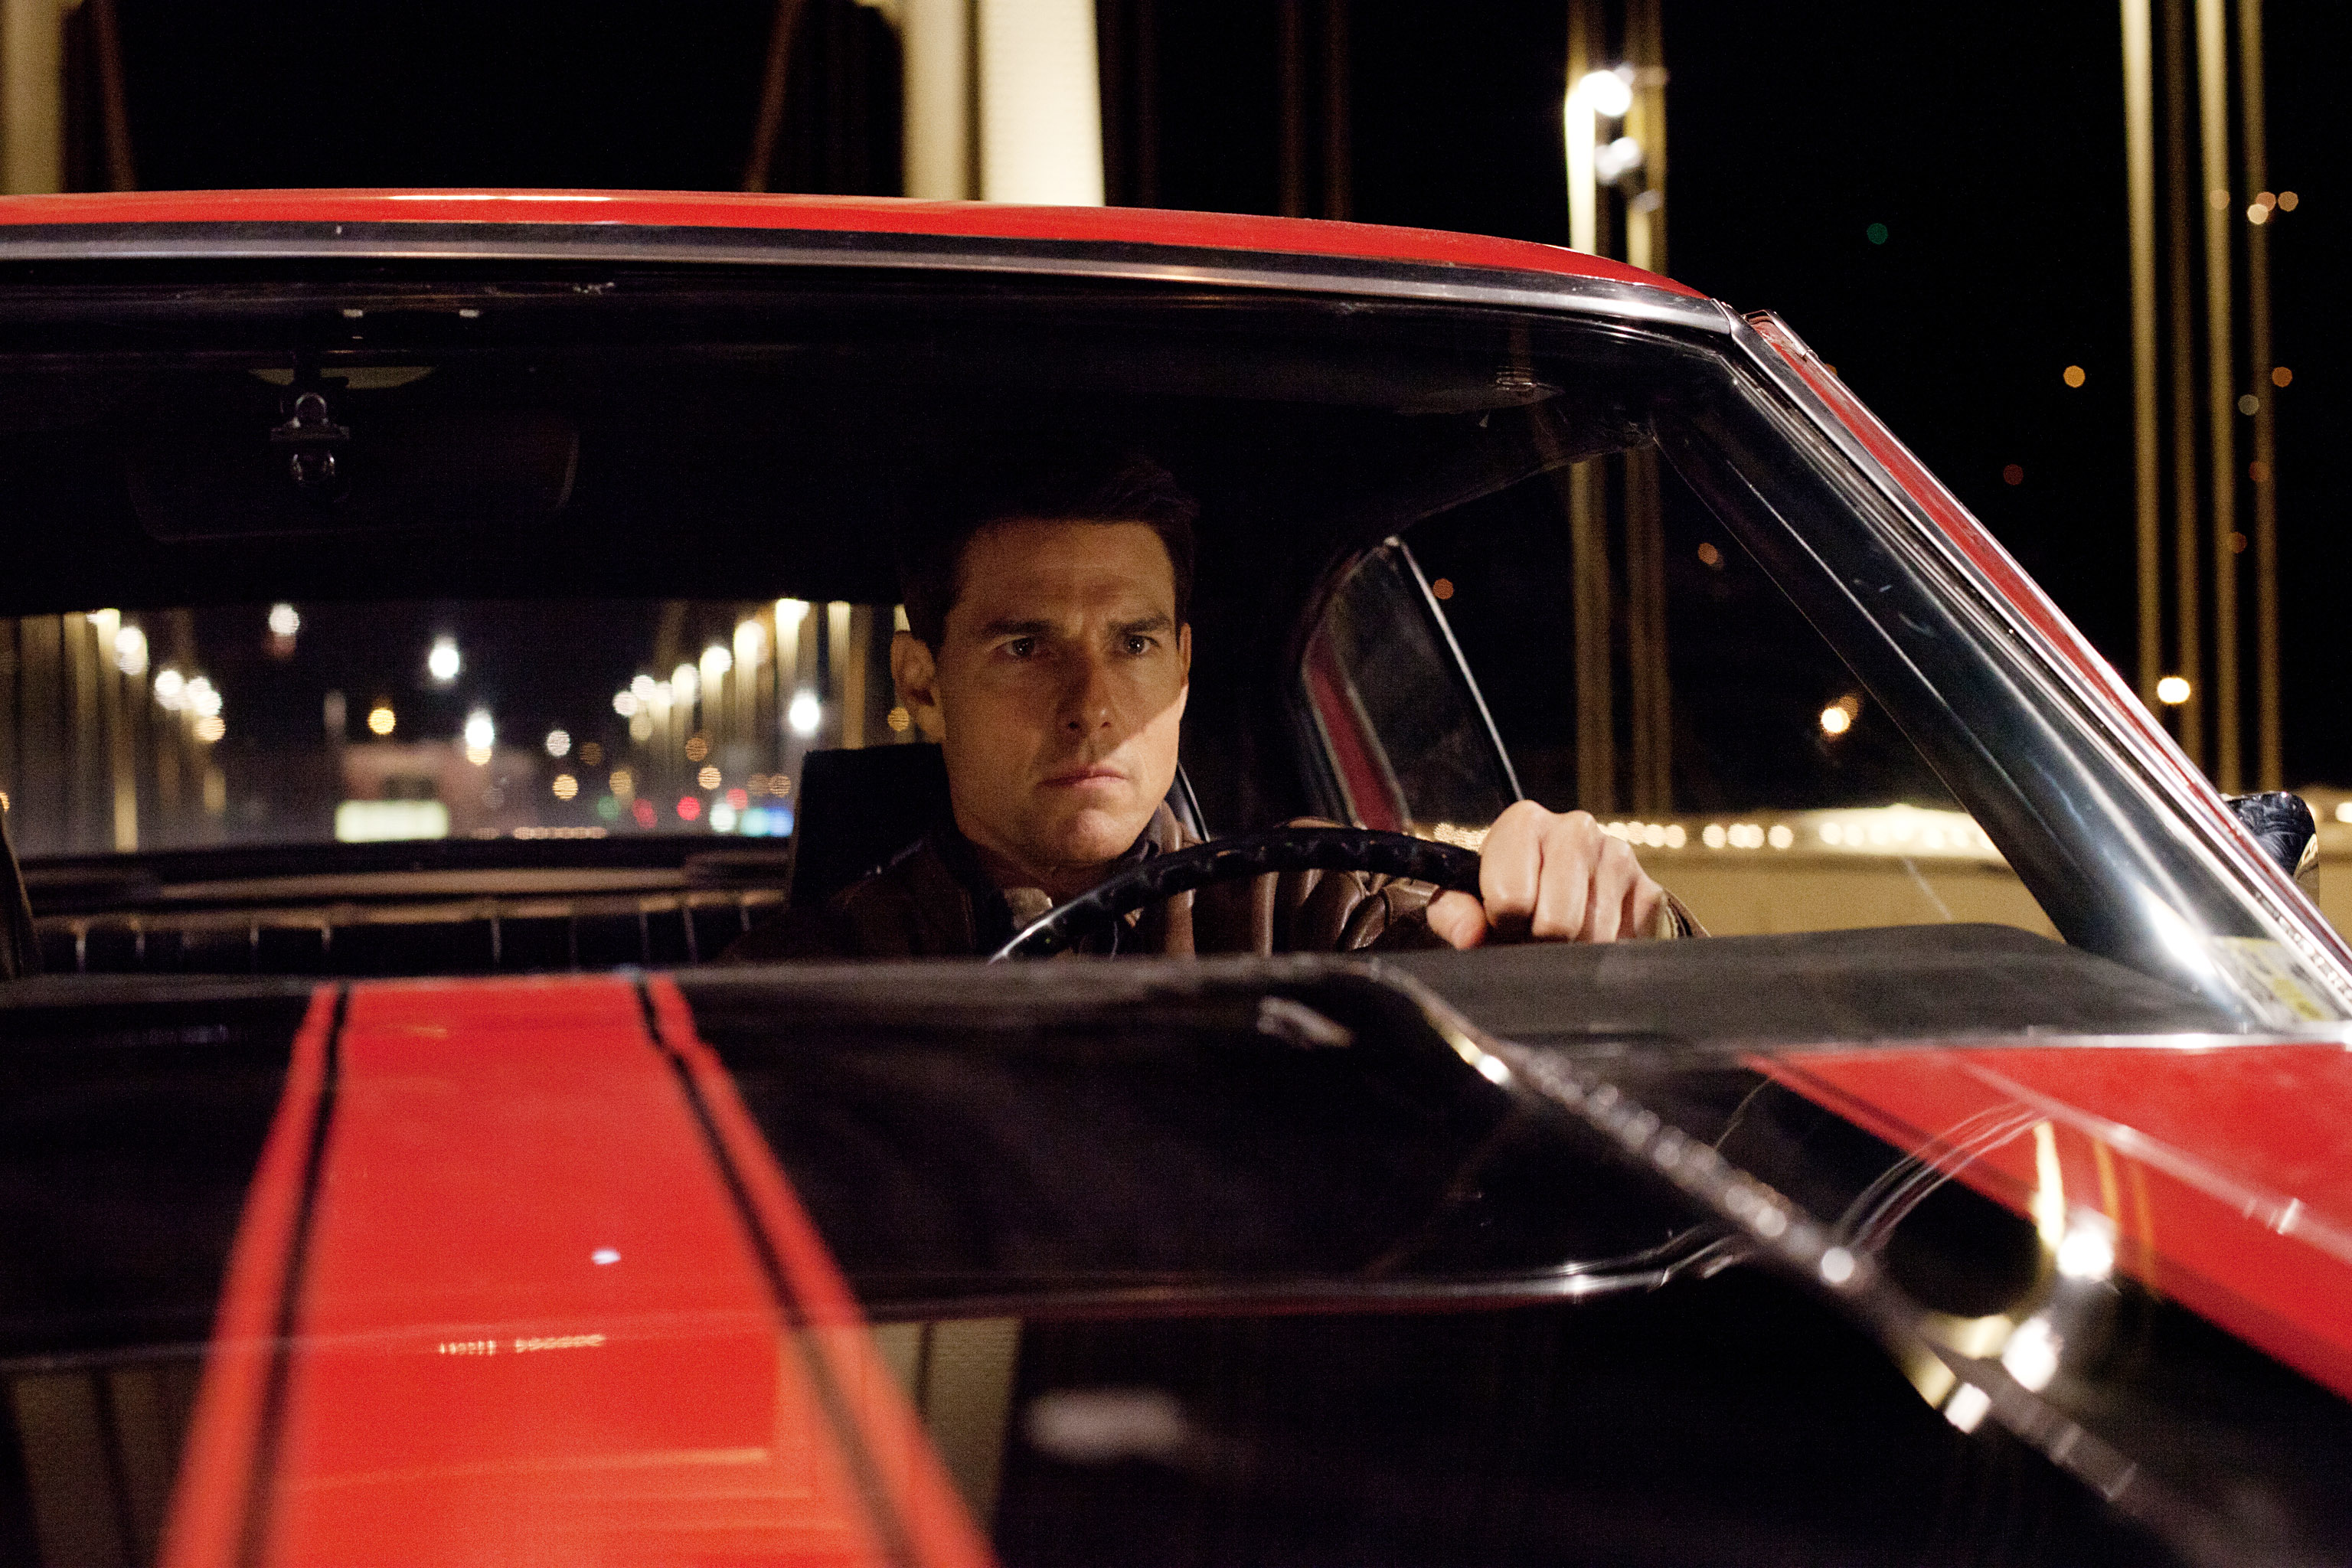 Tom Cruise sits behind the wheel of a red and black striped car.